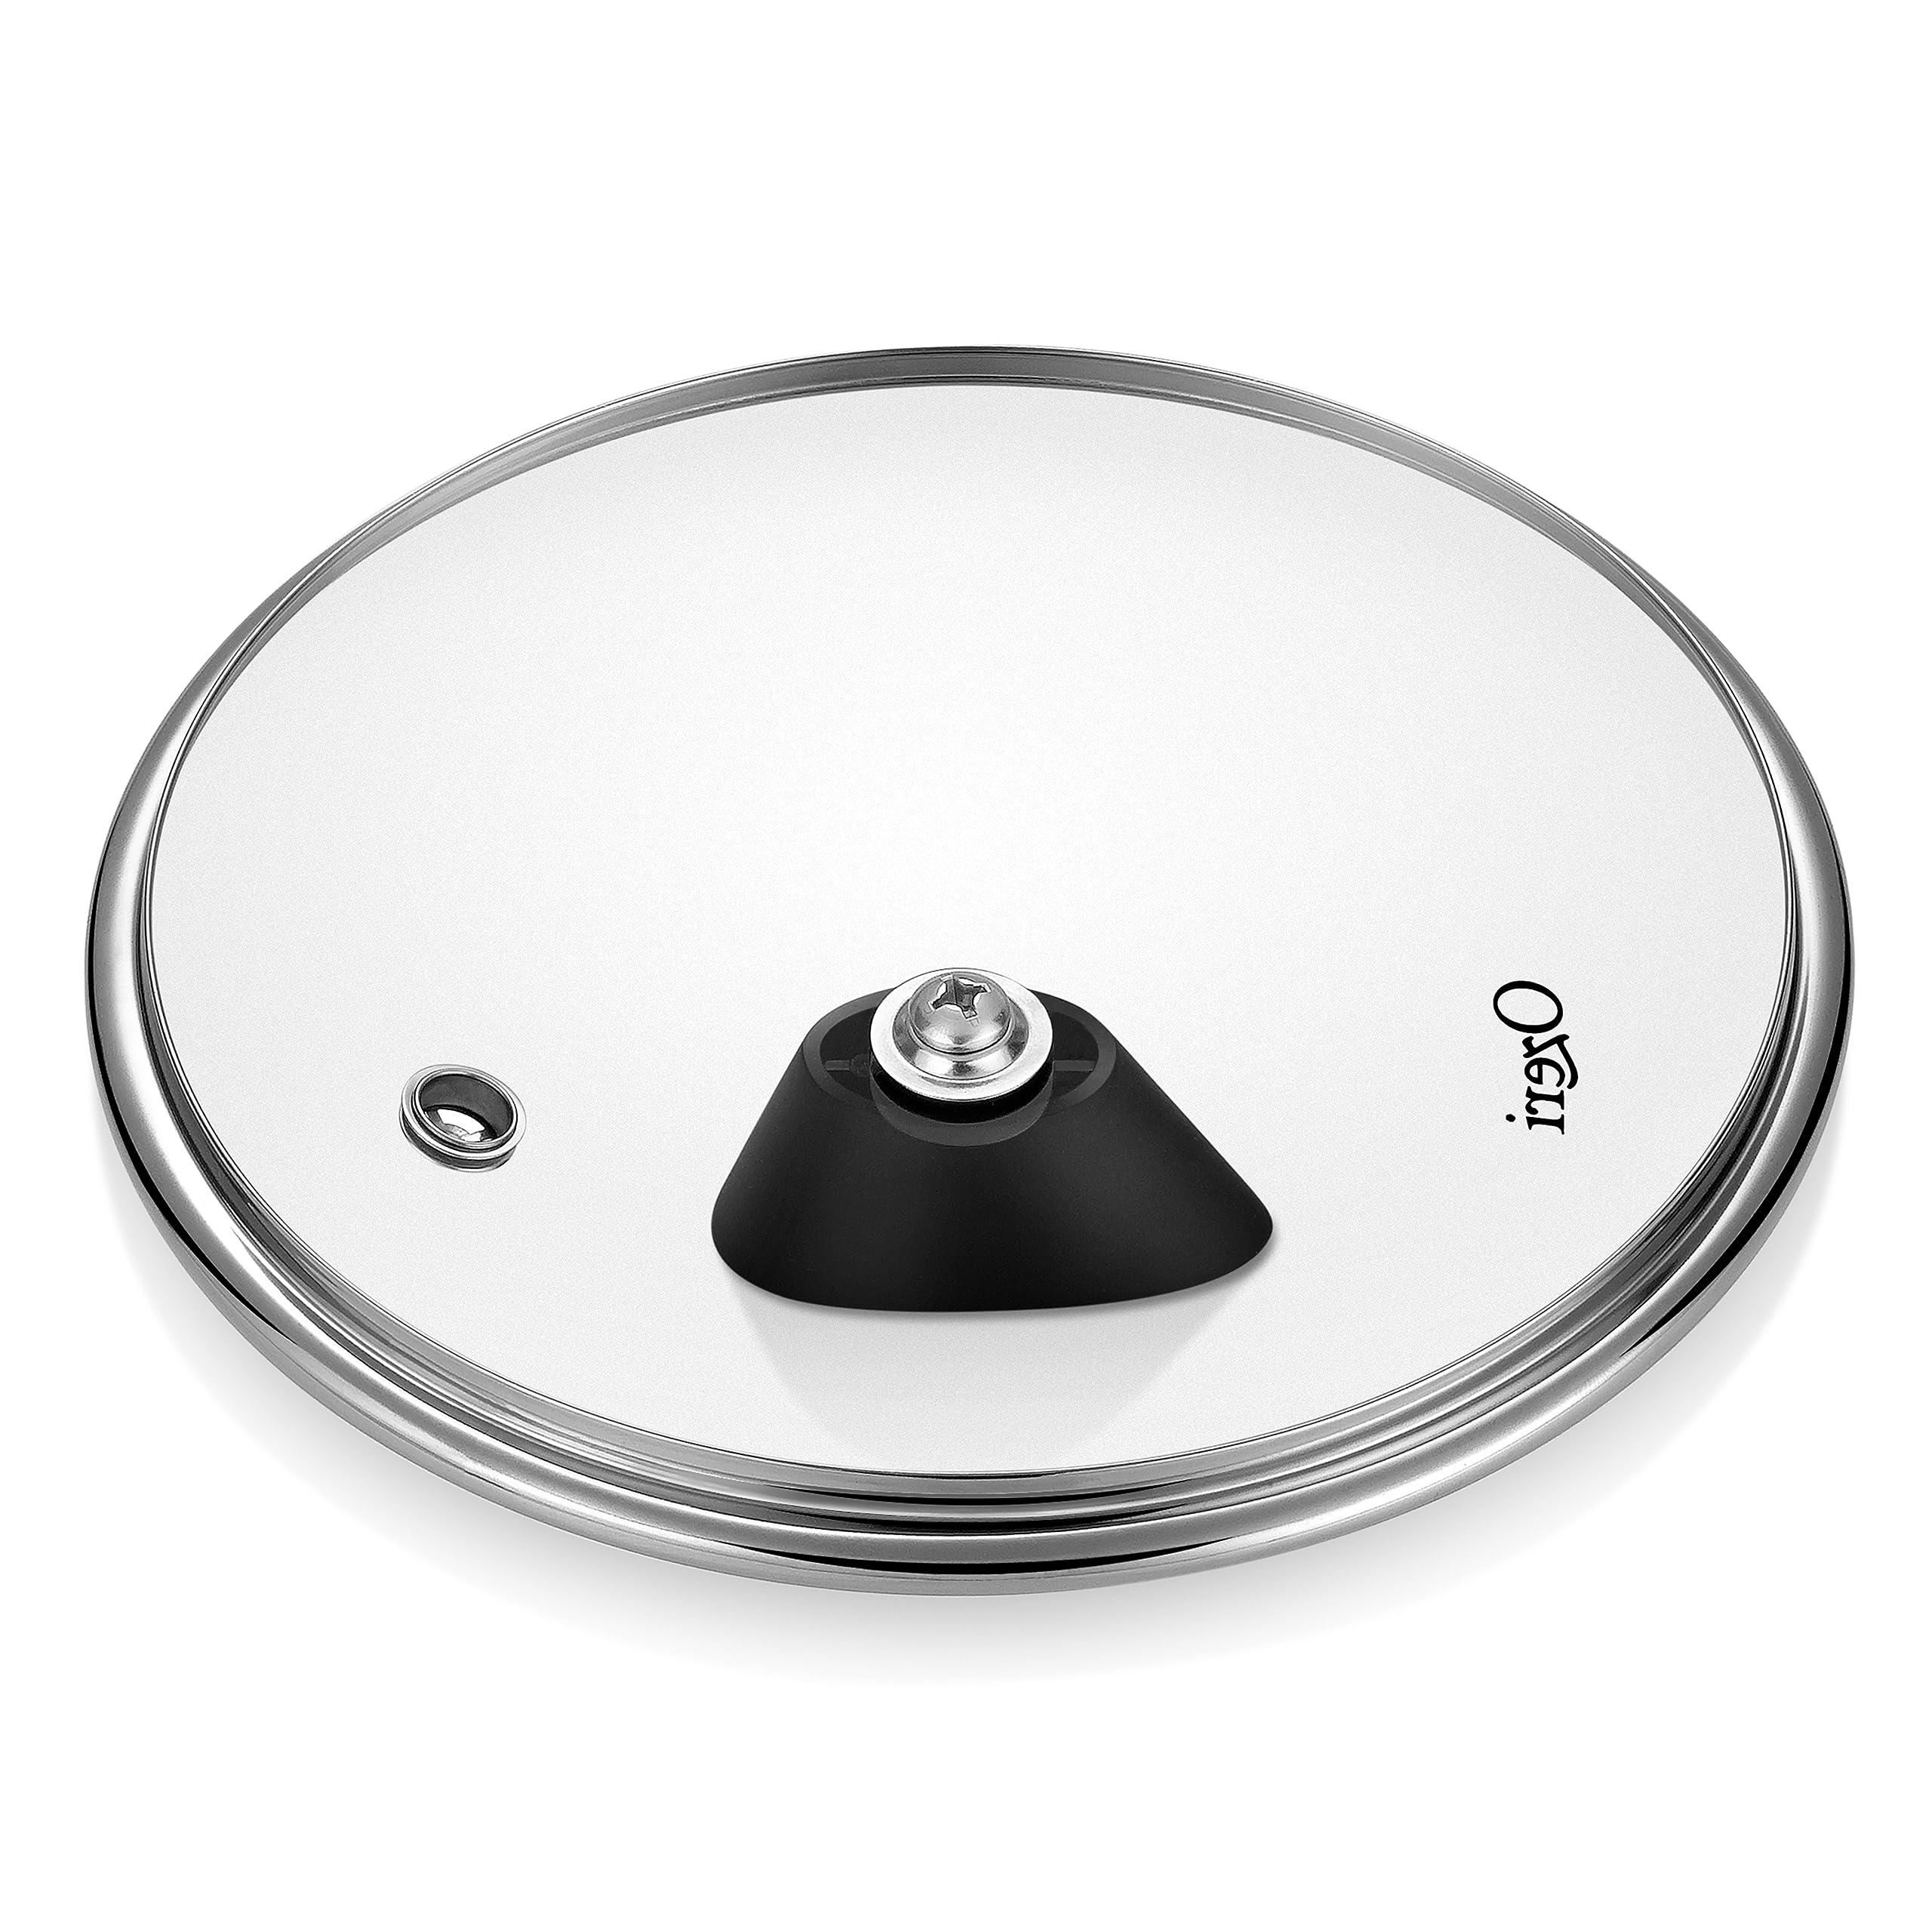 Ozeri 8 Frying Pan Lid in Tempered glass, by Ozeri